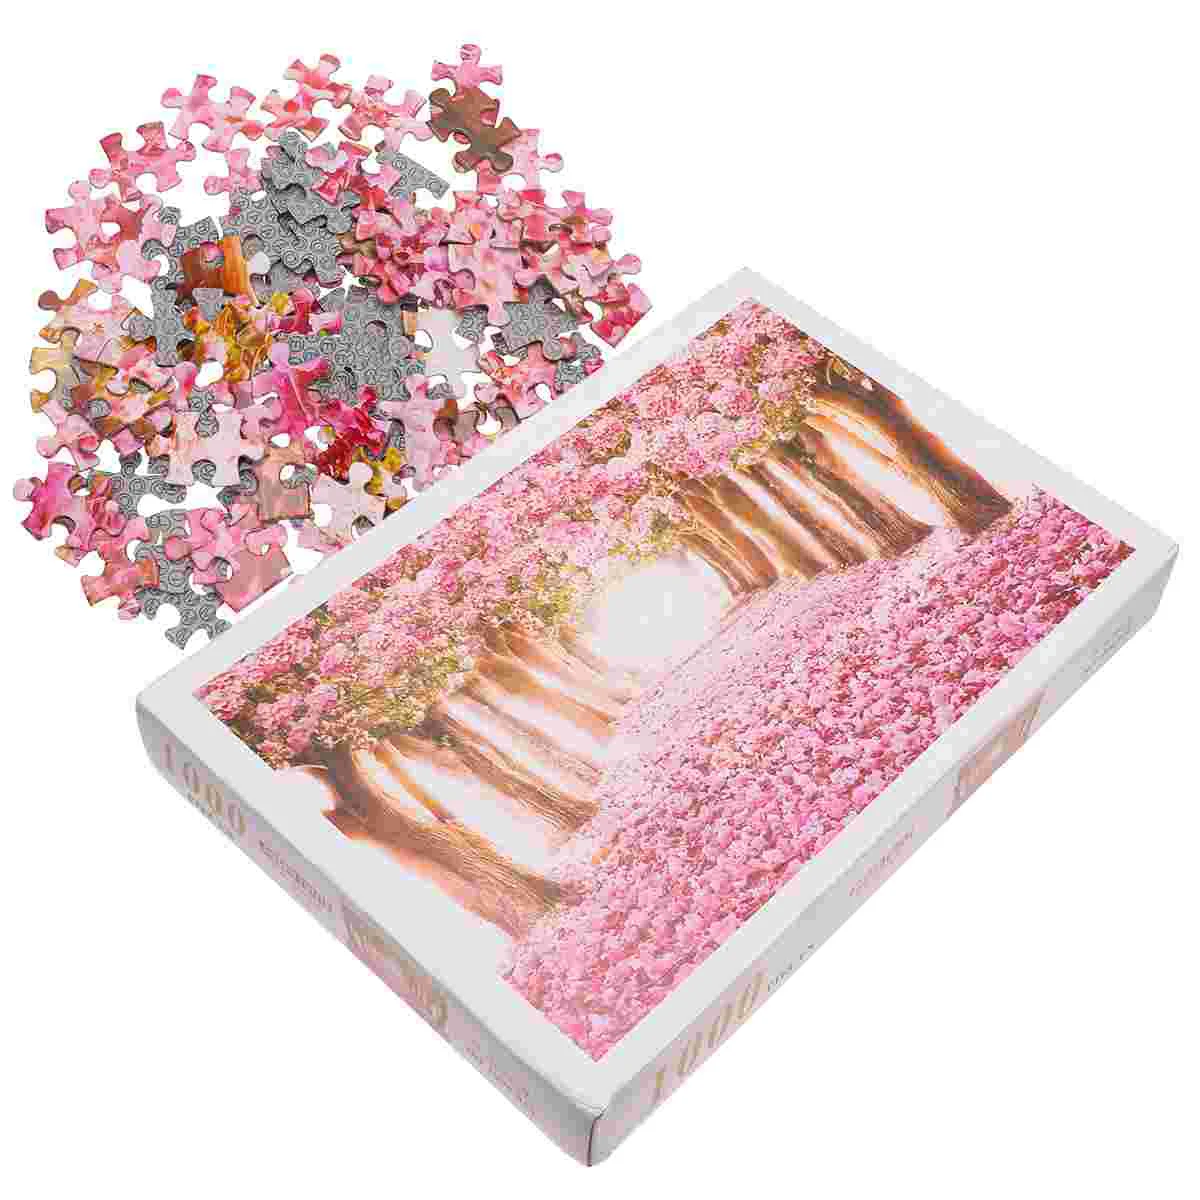 

Adult Jigsaw Puzzle Cherry Tree Kidcraft Playset Adukt Toys Blossom Oil Painting